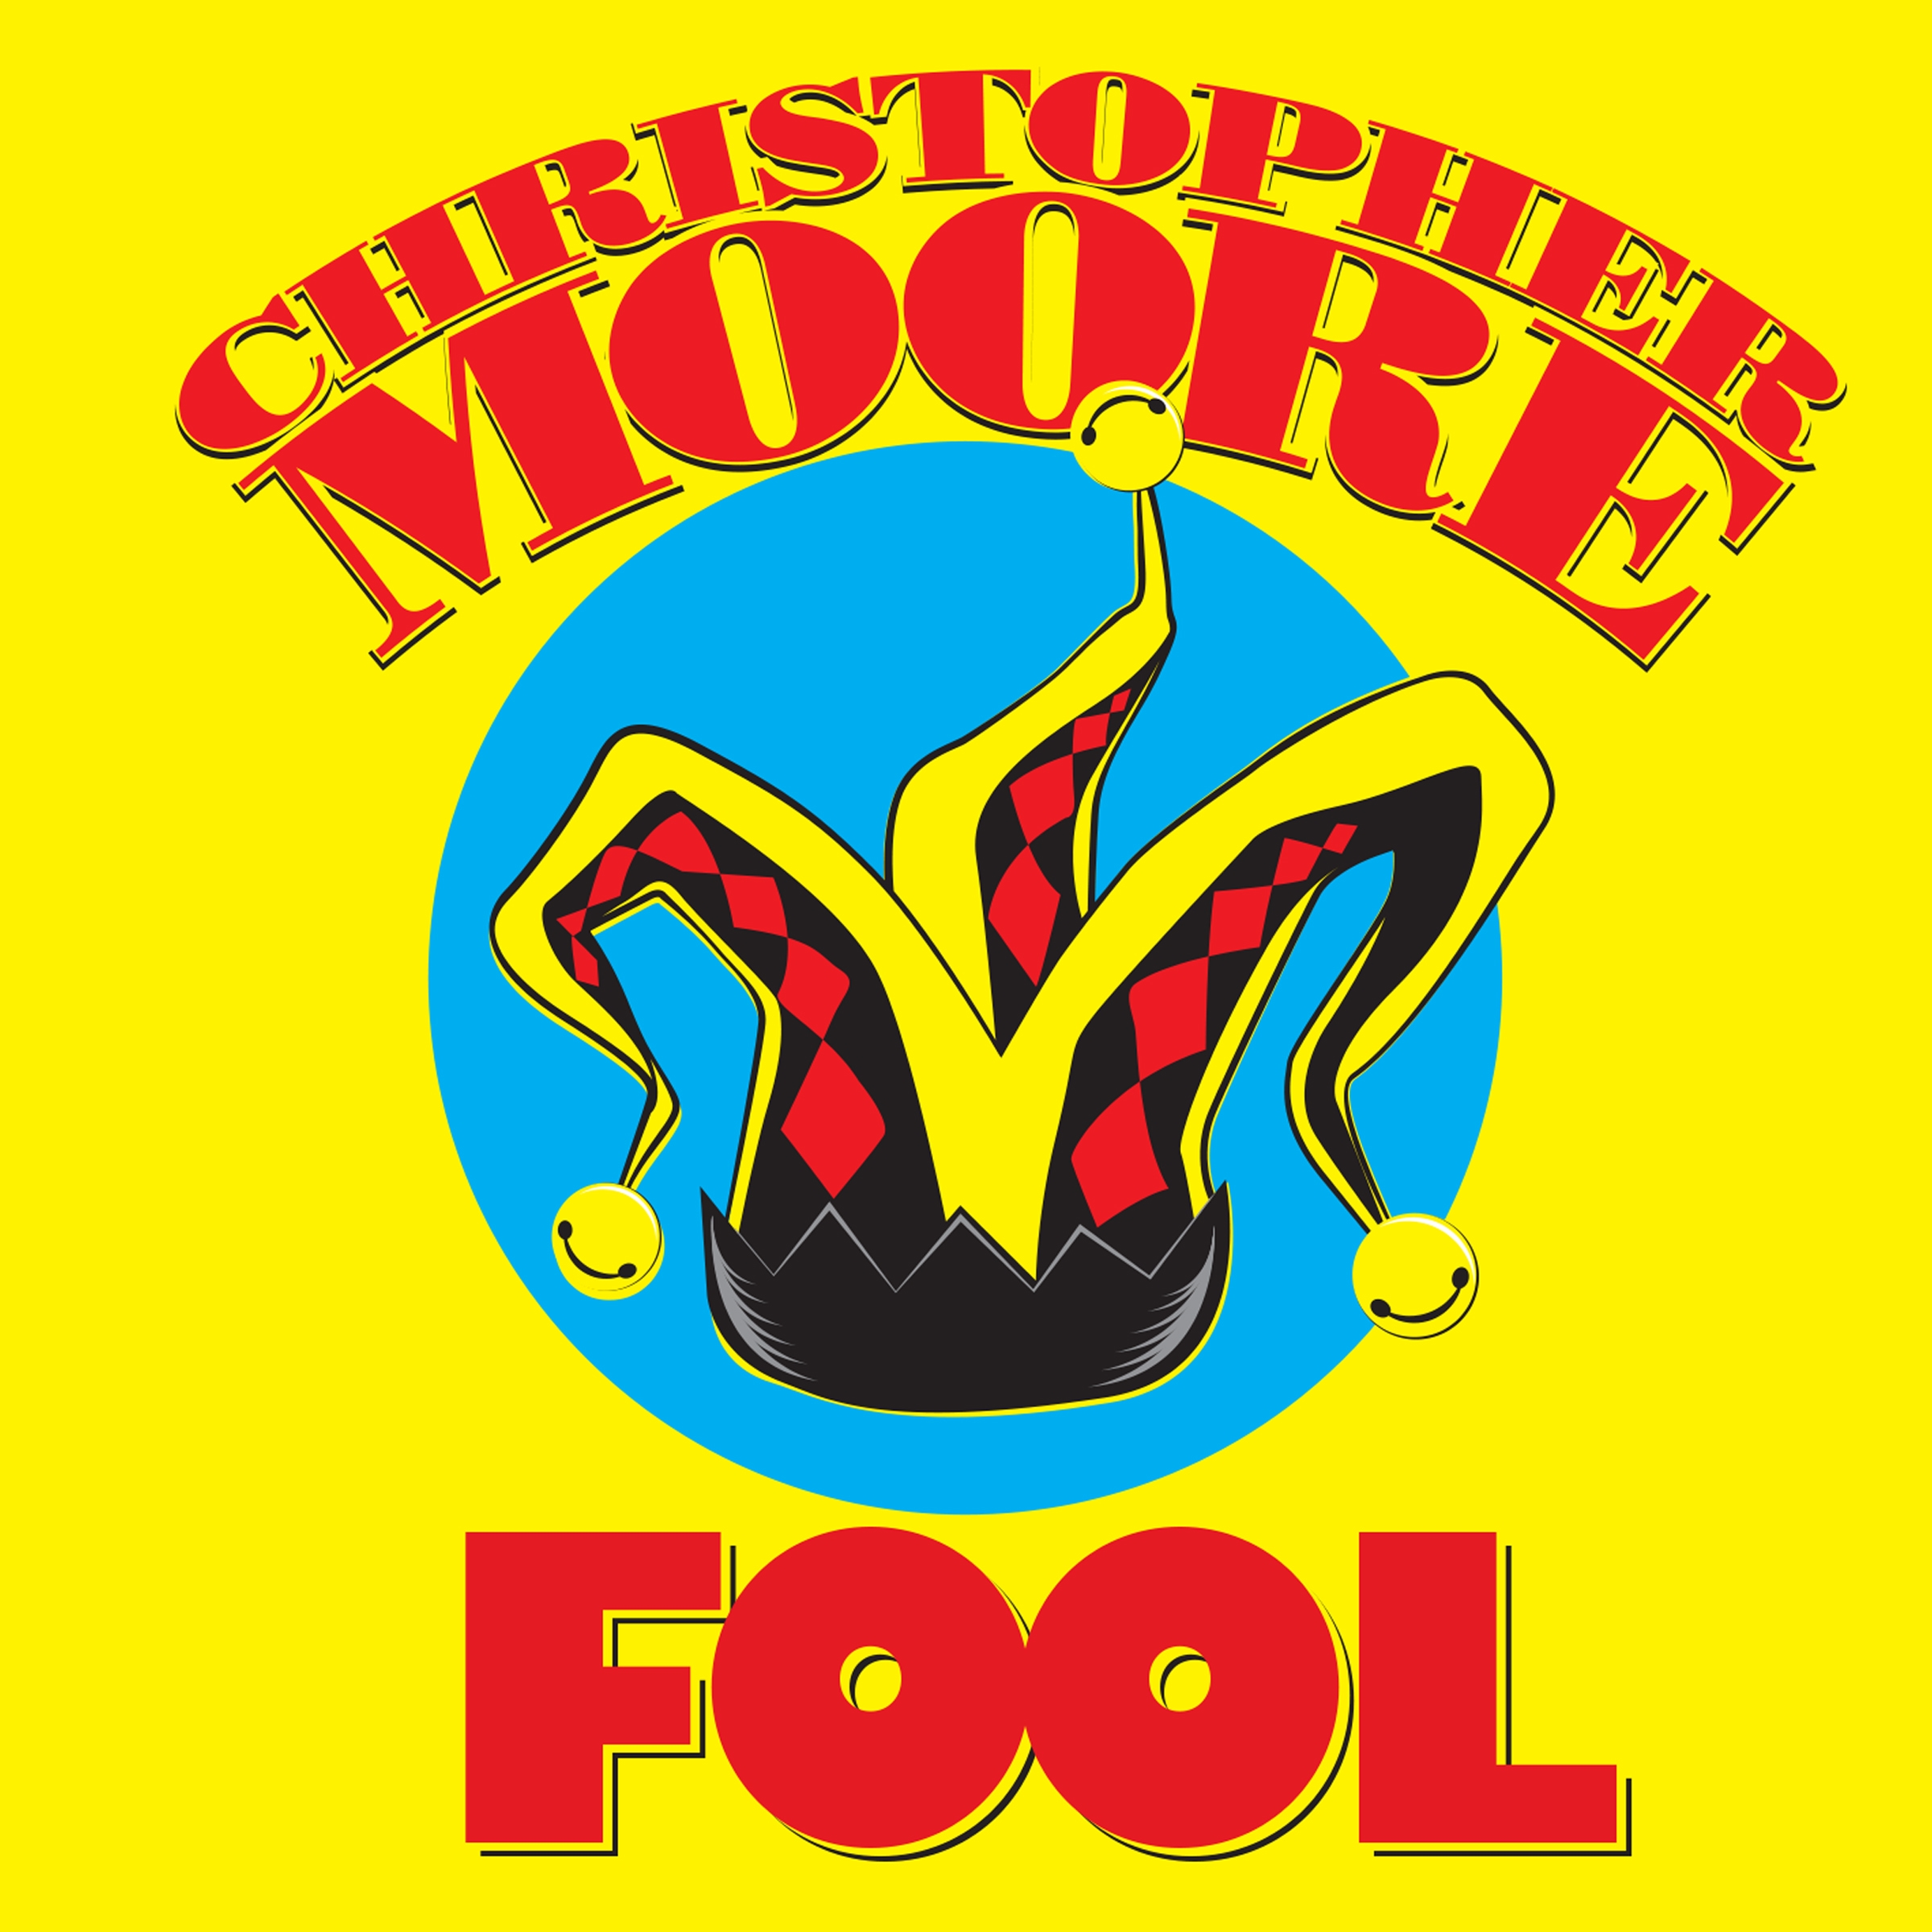 fool book christopher moore